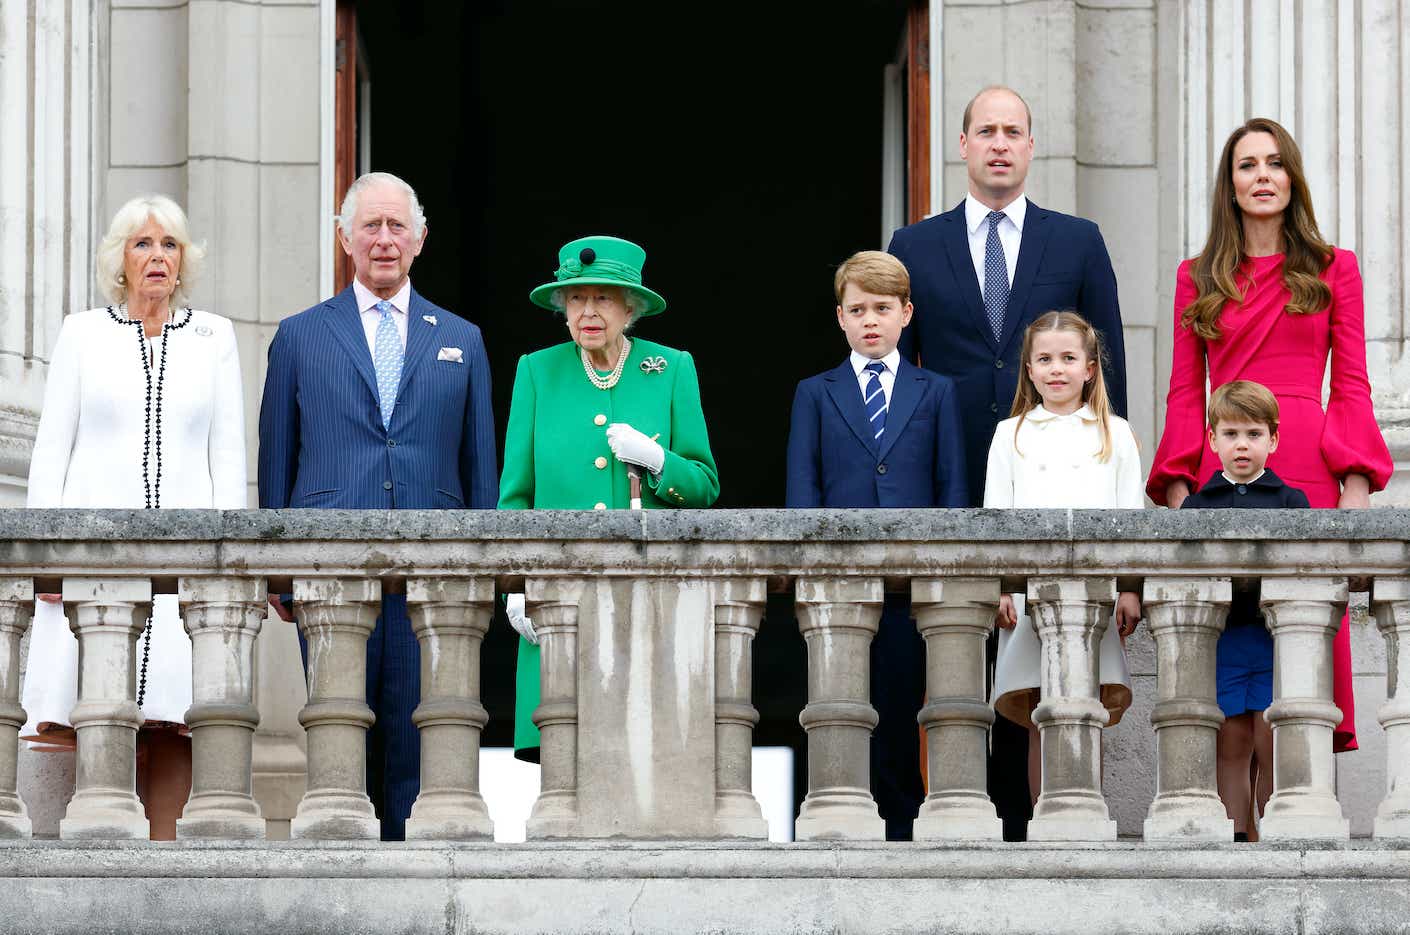 Queen Elizabeth II stands with her family on the balcony of Buckingham Palace during the 2022 celebration of her platinum jubilee.